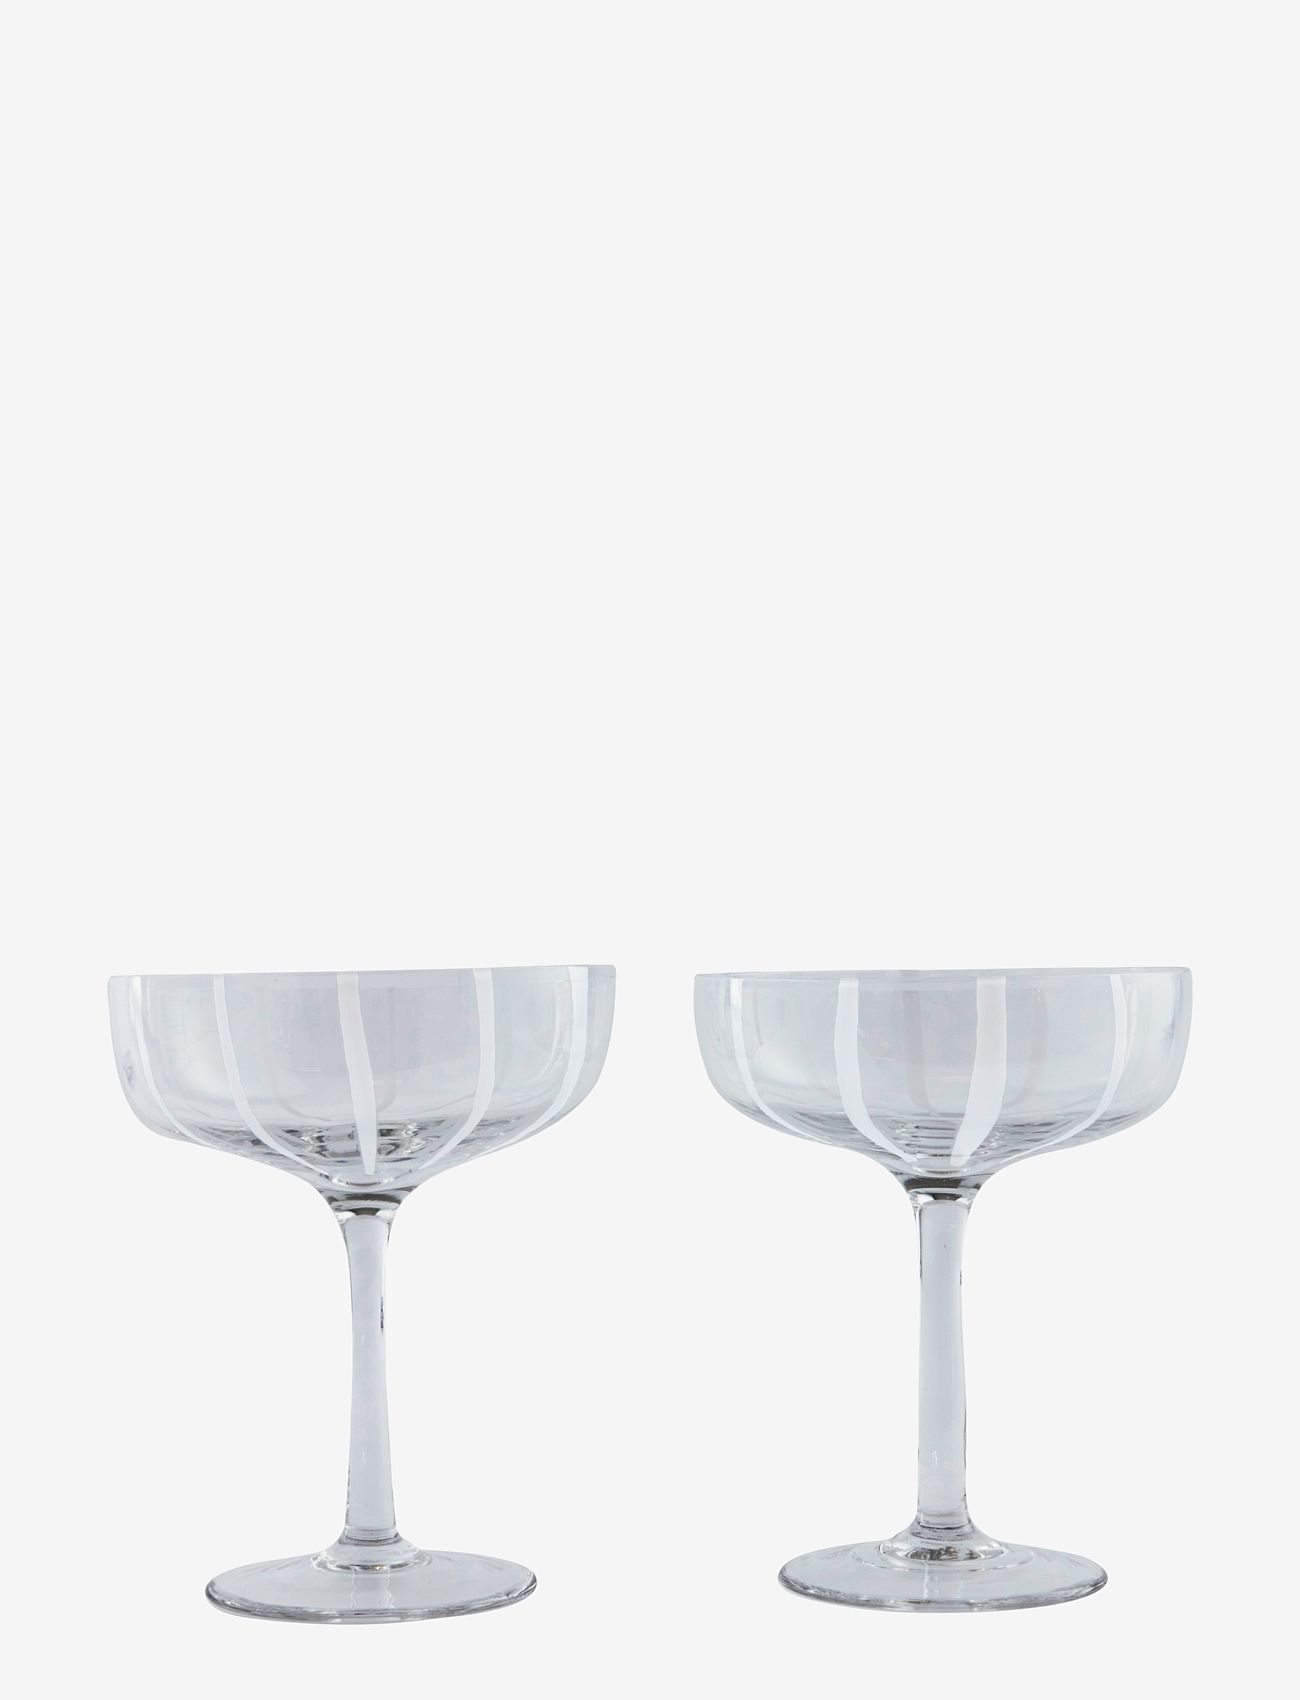 OYOY Living Design - Mizu Coupe Glass - Pack of 2 - champagneglass - clear - 0